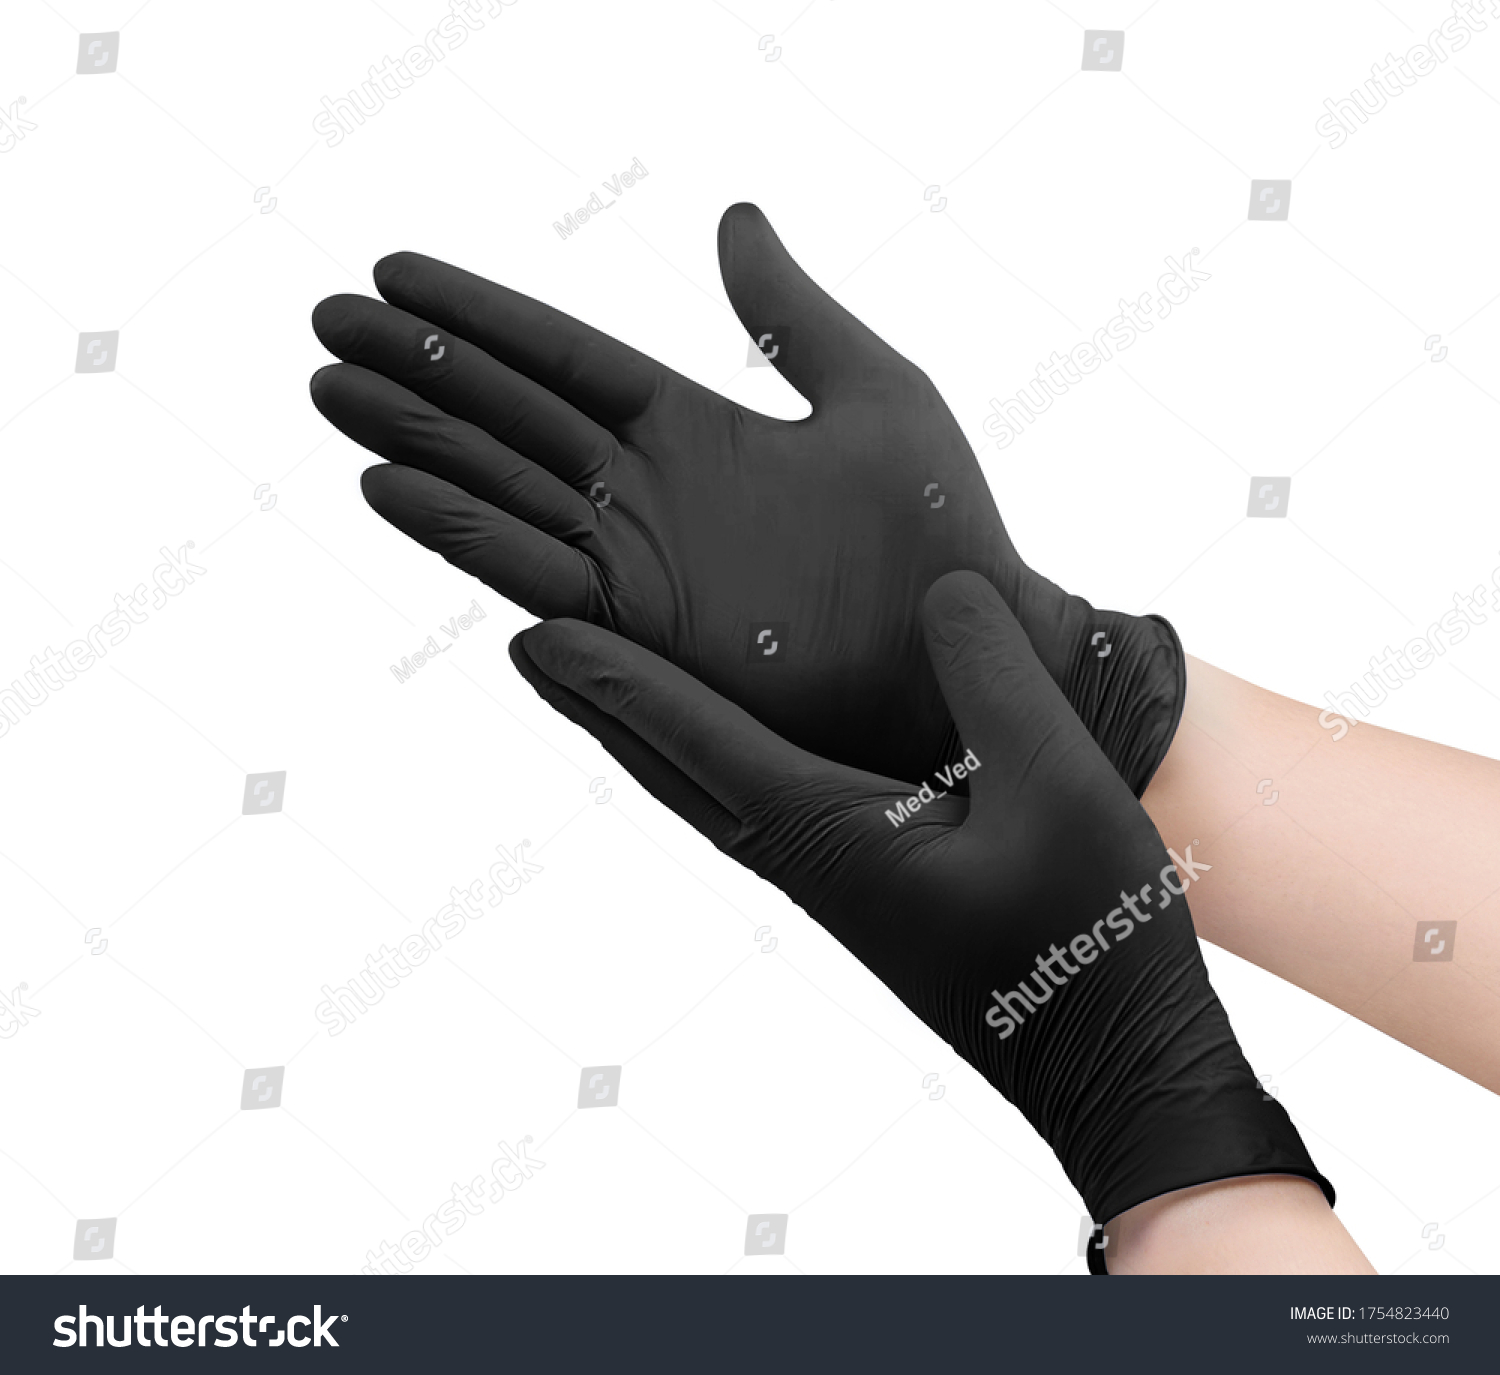 Two black surgical medical gloves isolated on white background with hands. Rubber glove manufacturing, human hand is wearing a latex glove. Doctor or nurse putting on nitrile protective gloves #1754823440